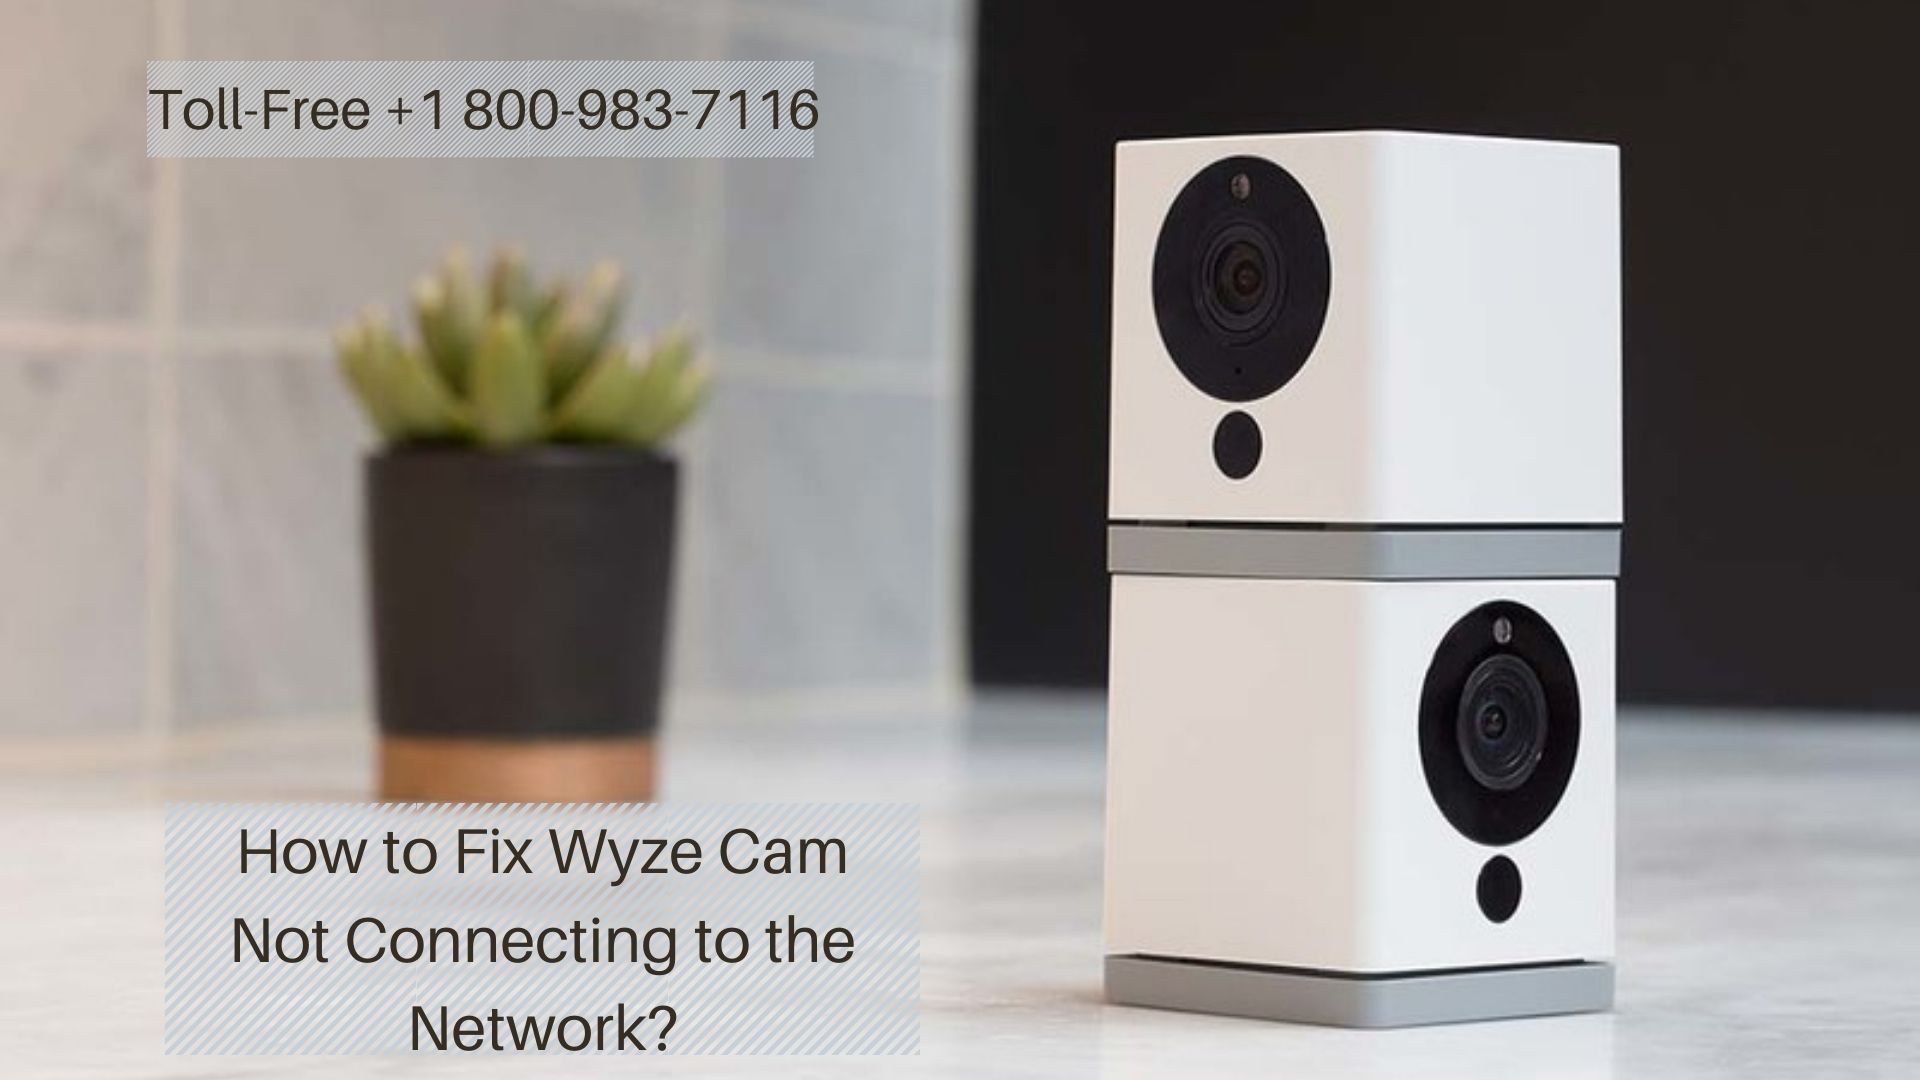 Wyze Cam Won't Connect 1-8009837116 Wyze Cam Not Connecting to Network Fixes